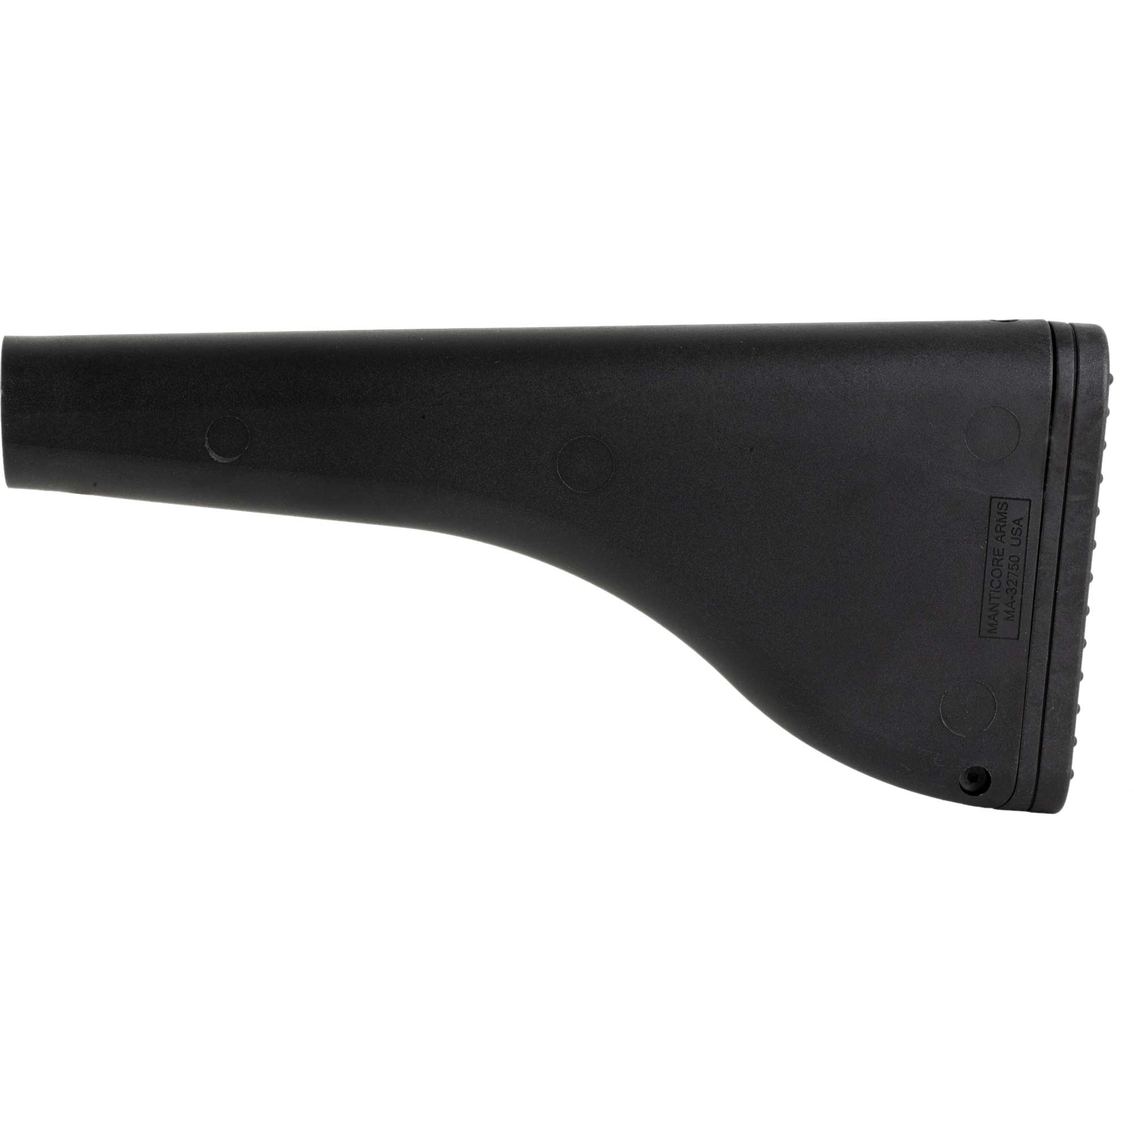 Manticore Arms Fixed Trapdoor Stock Fits Yugo M85/M92 Rifle Black - Image 2 of 3